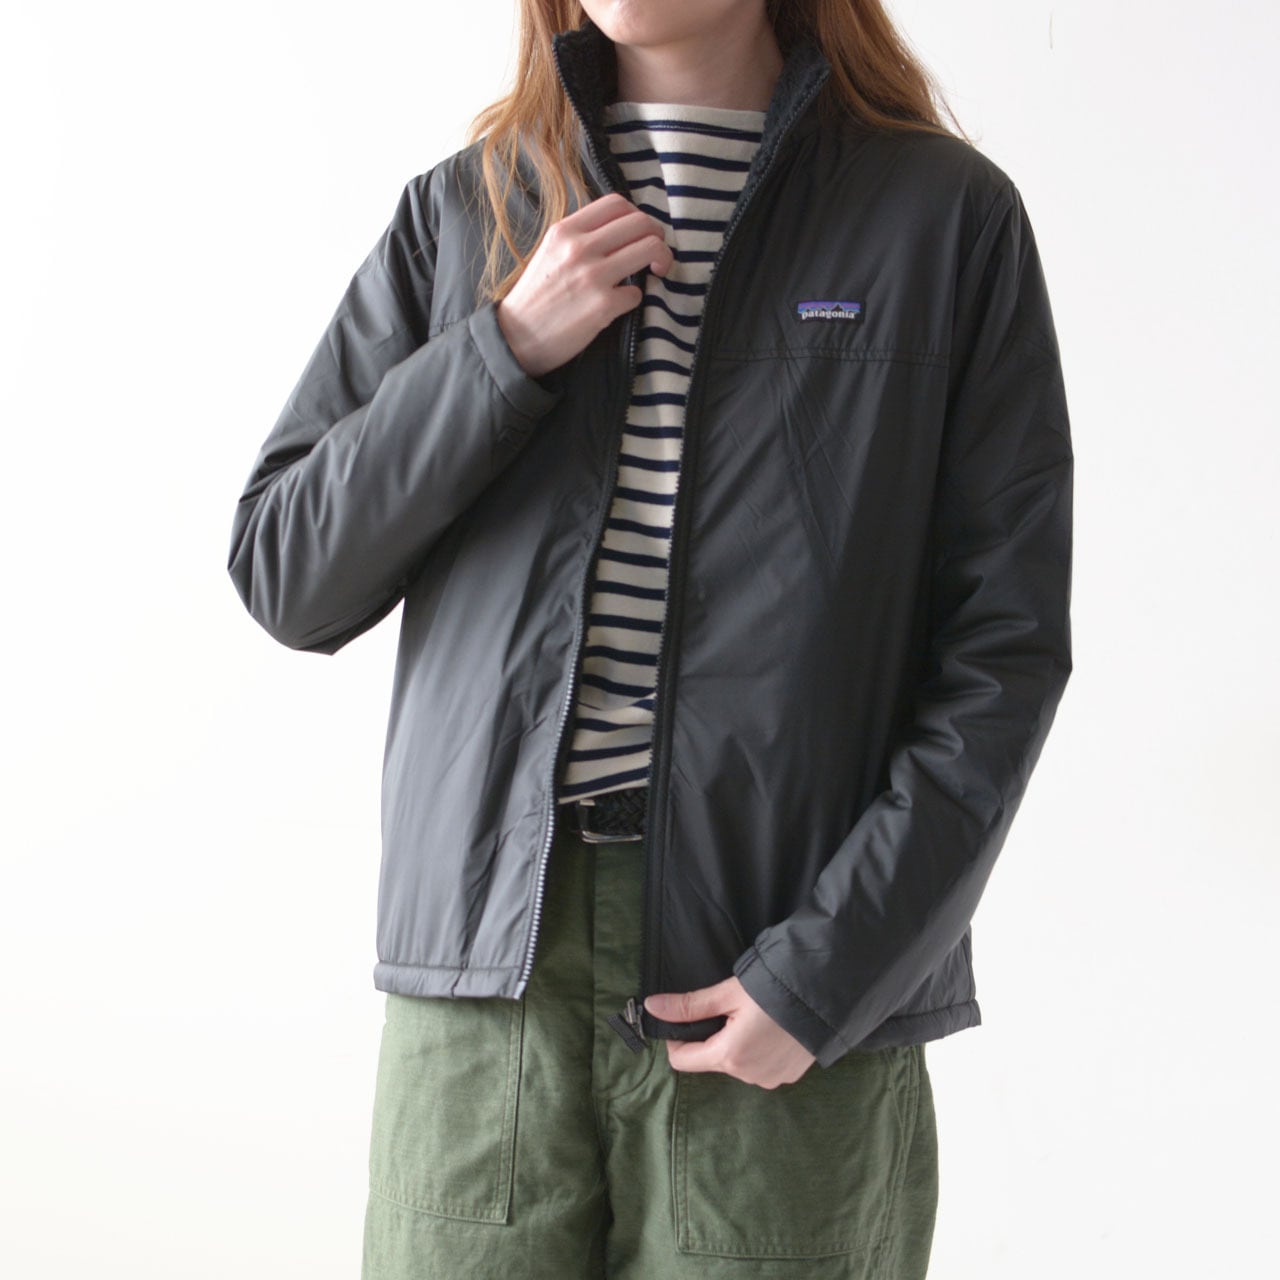 Patagonia [パタゴニア] Boy's 4-in-1 Everyday Jkt [68035] ボーイズ 